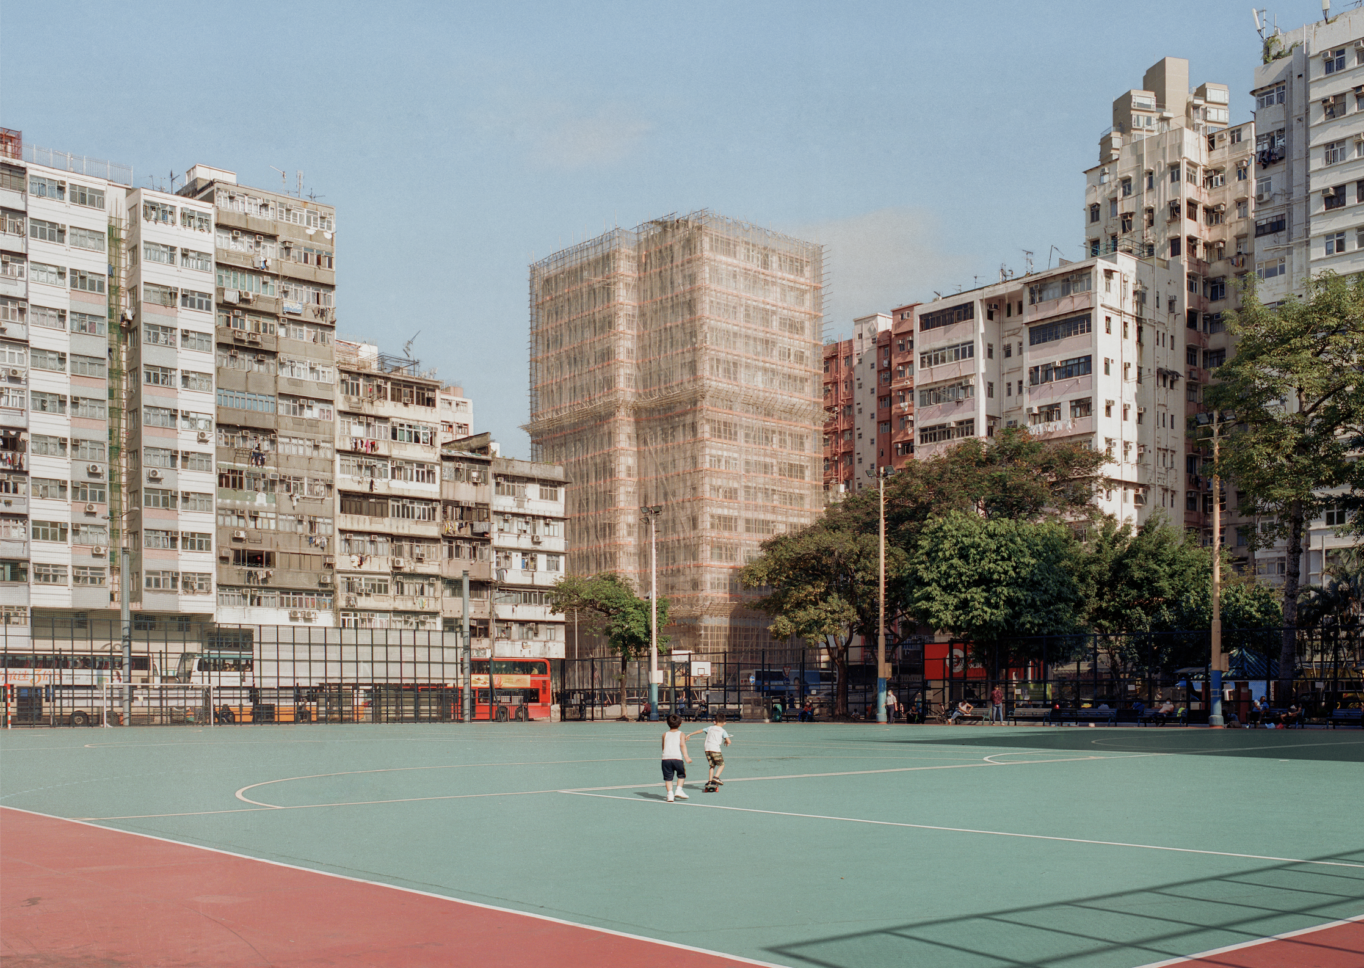 Colour photograph of a city scape and basketball court